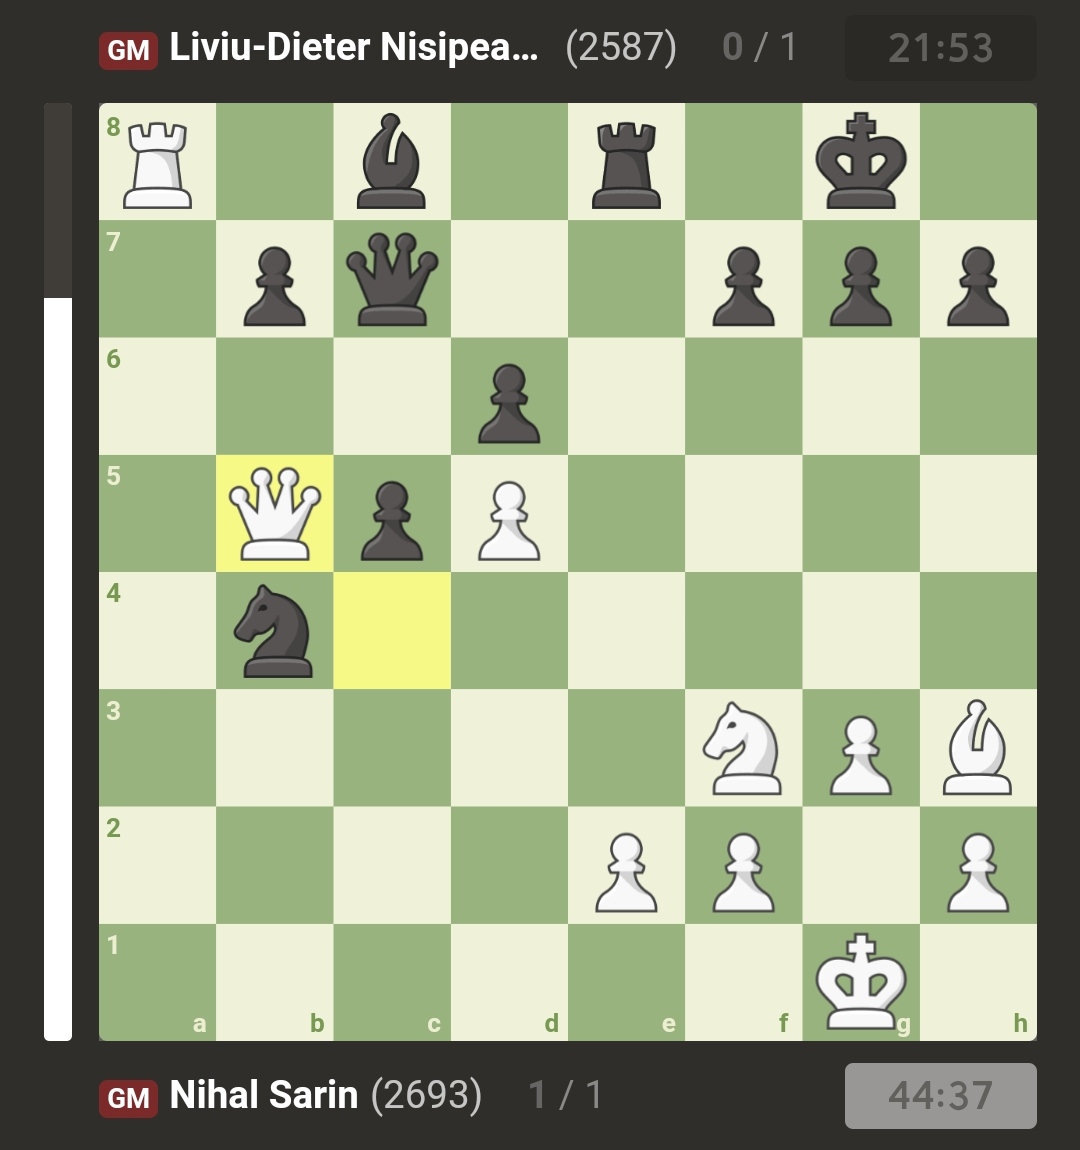 Nice little tactic from Sarin in today's @SchachBL: Kf8 lost a piece after Qxe8+! What would have happened after Rd8?